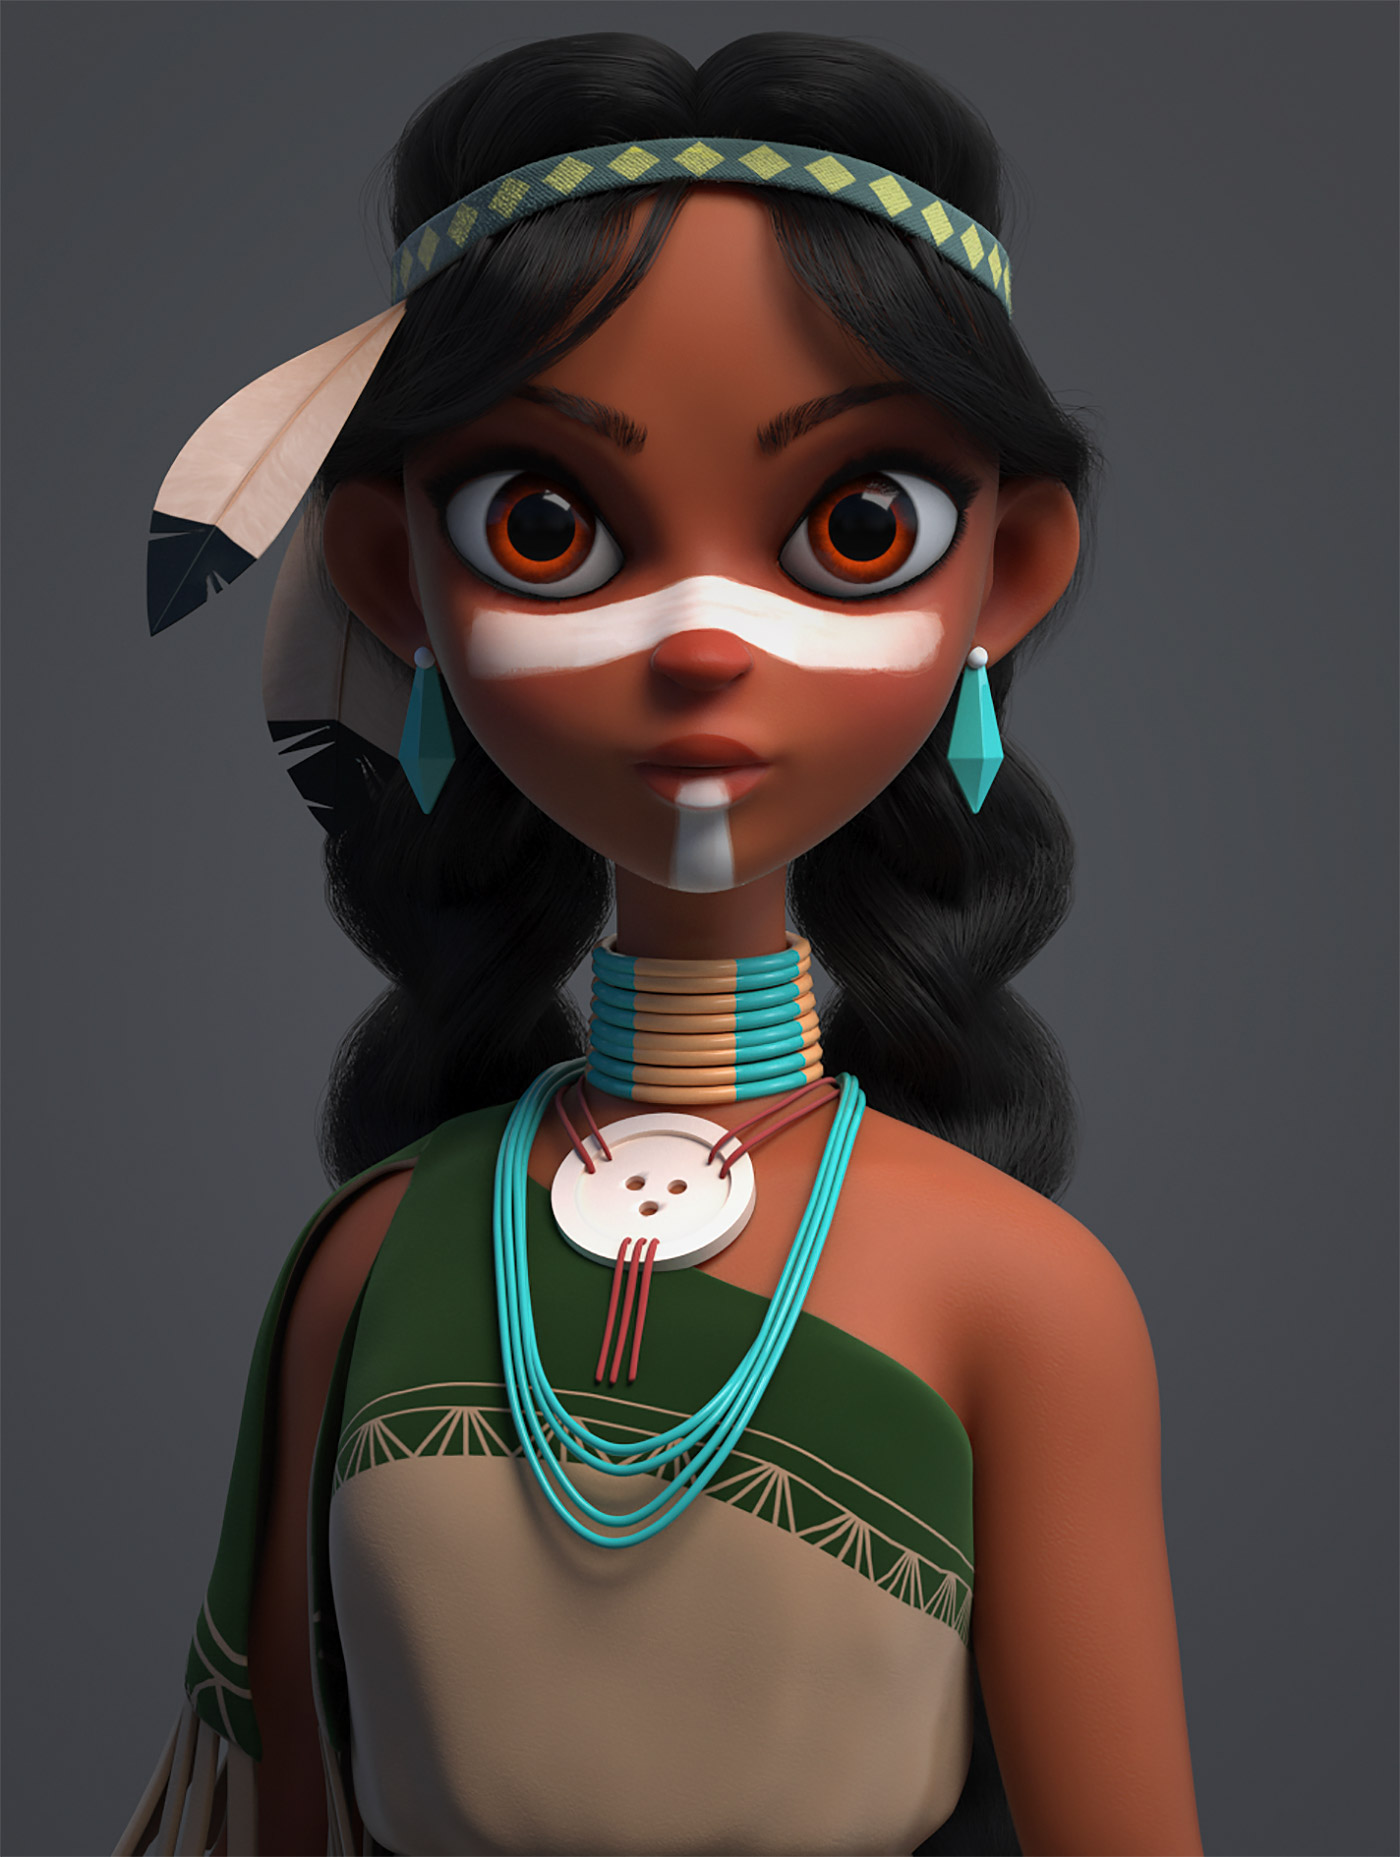 character-design-3d-illustrations-by-zackb-daily-design-inspiration